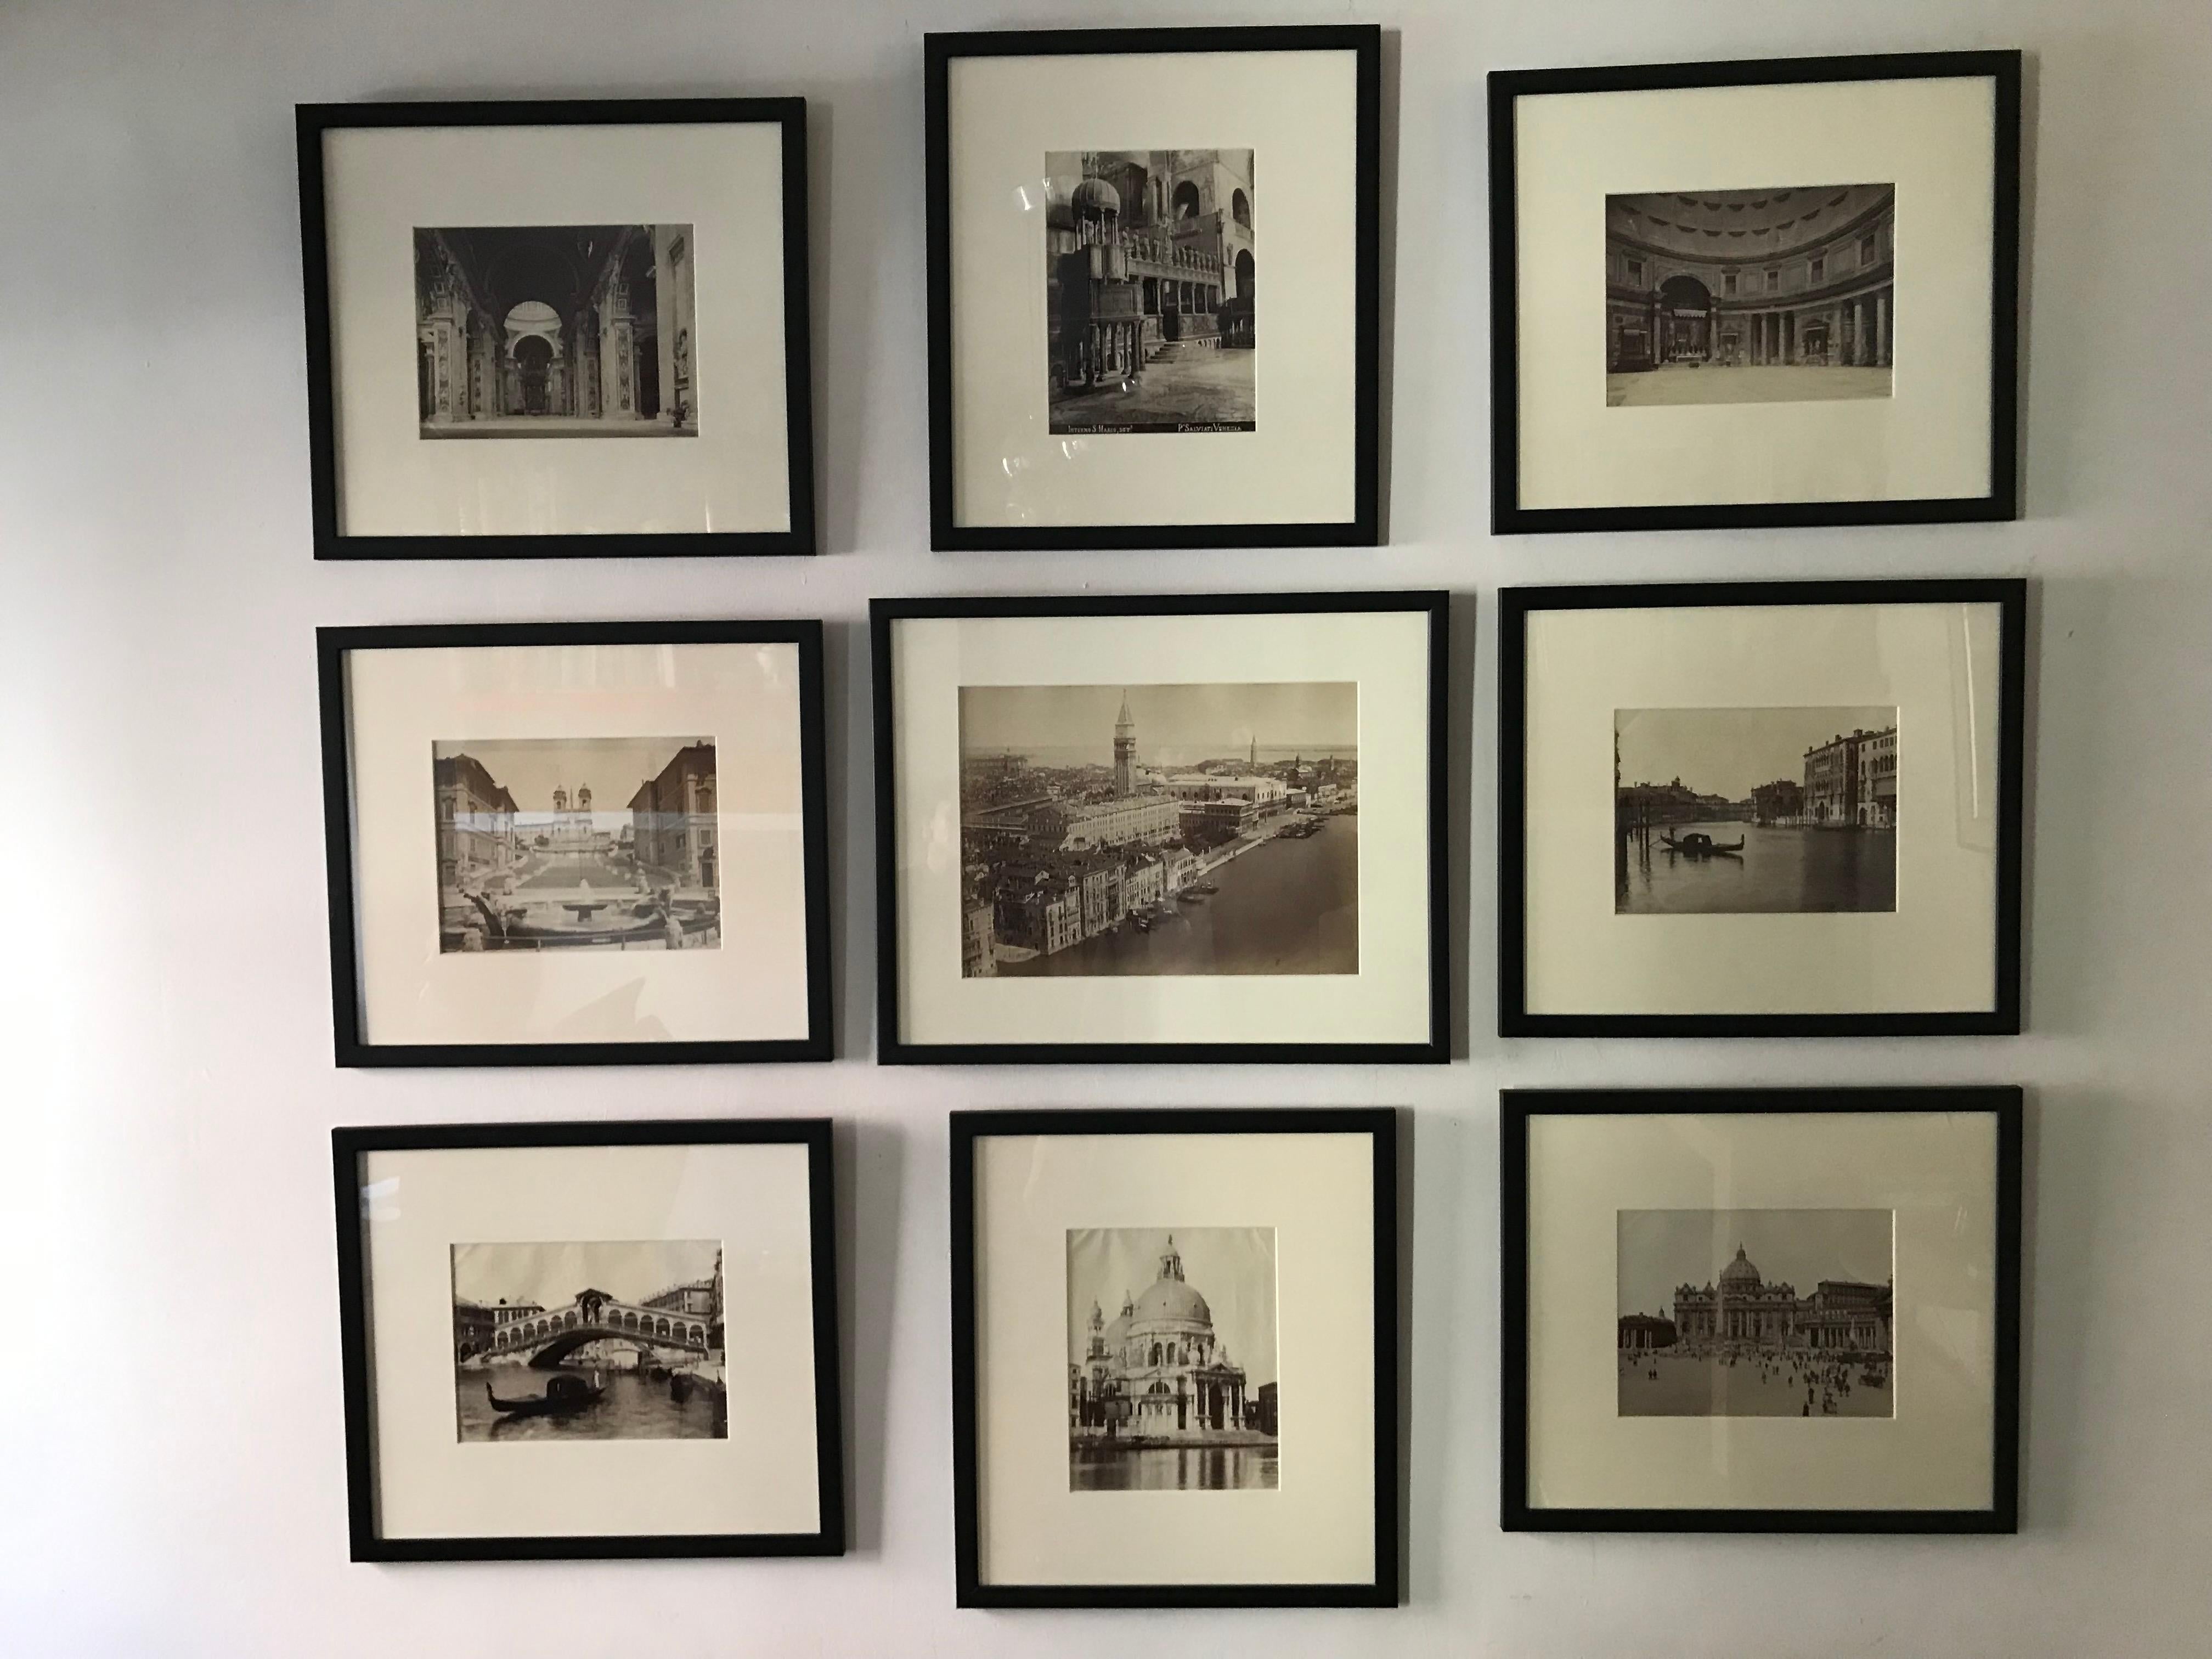 Set of nine black and white early 20th century photographs of Venice and Rome. Framed set of nine photographs depicting famous sites in Venice and Rome including Santa Maria Della Salute, San MarCo, the Rialto, the Doges Palace, St. Peter’s, the